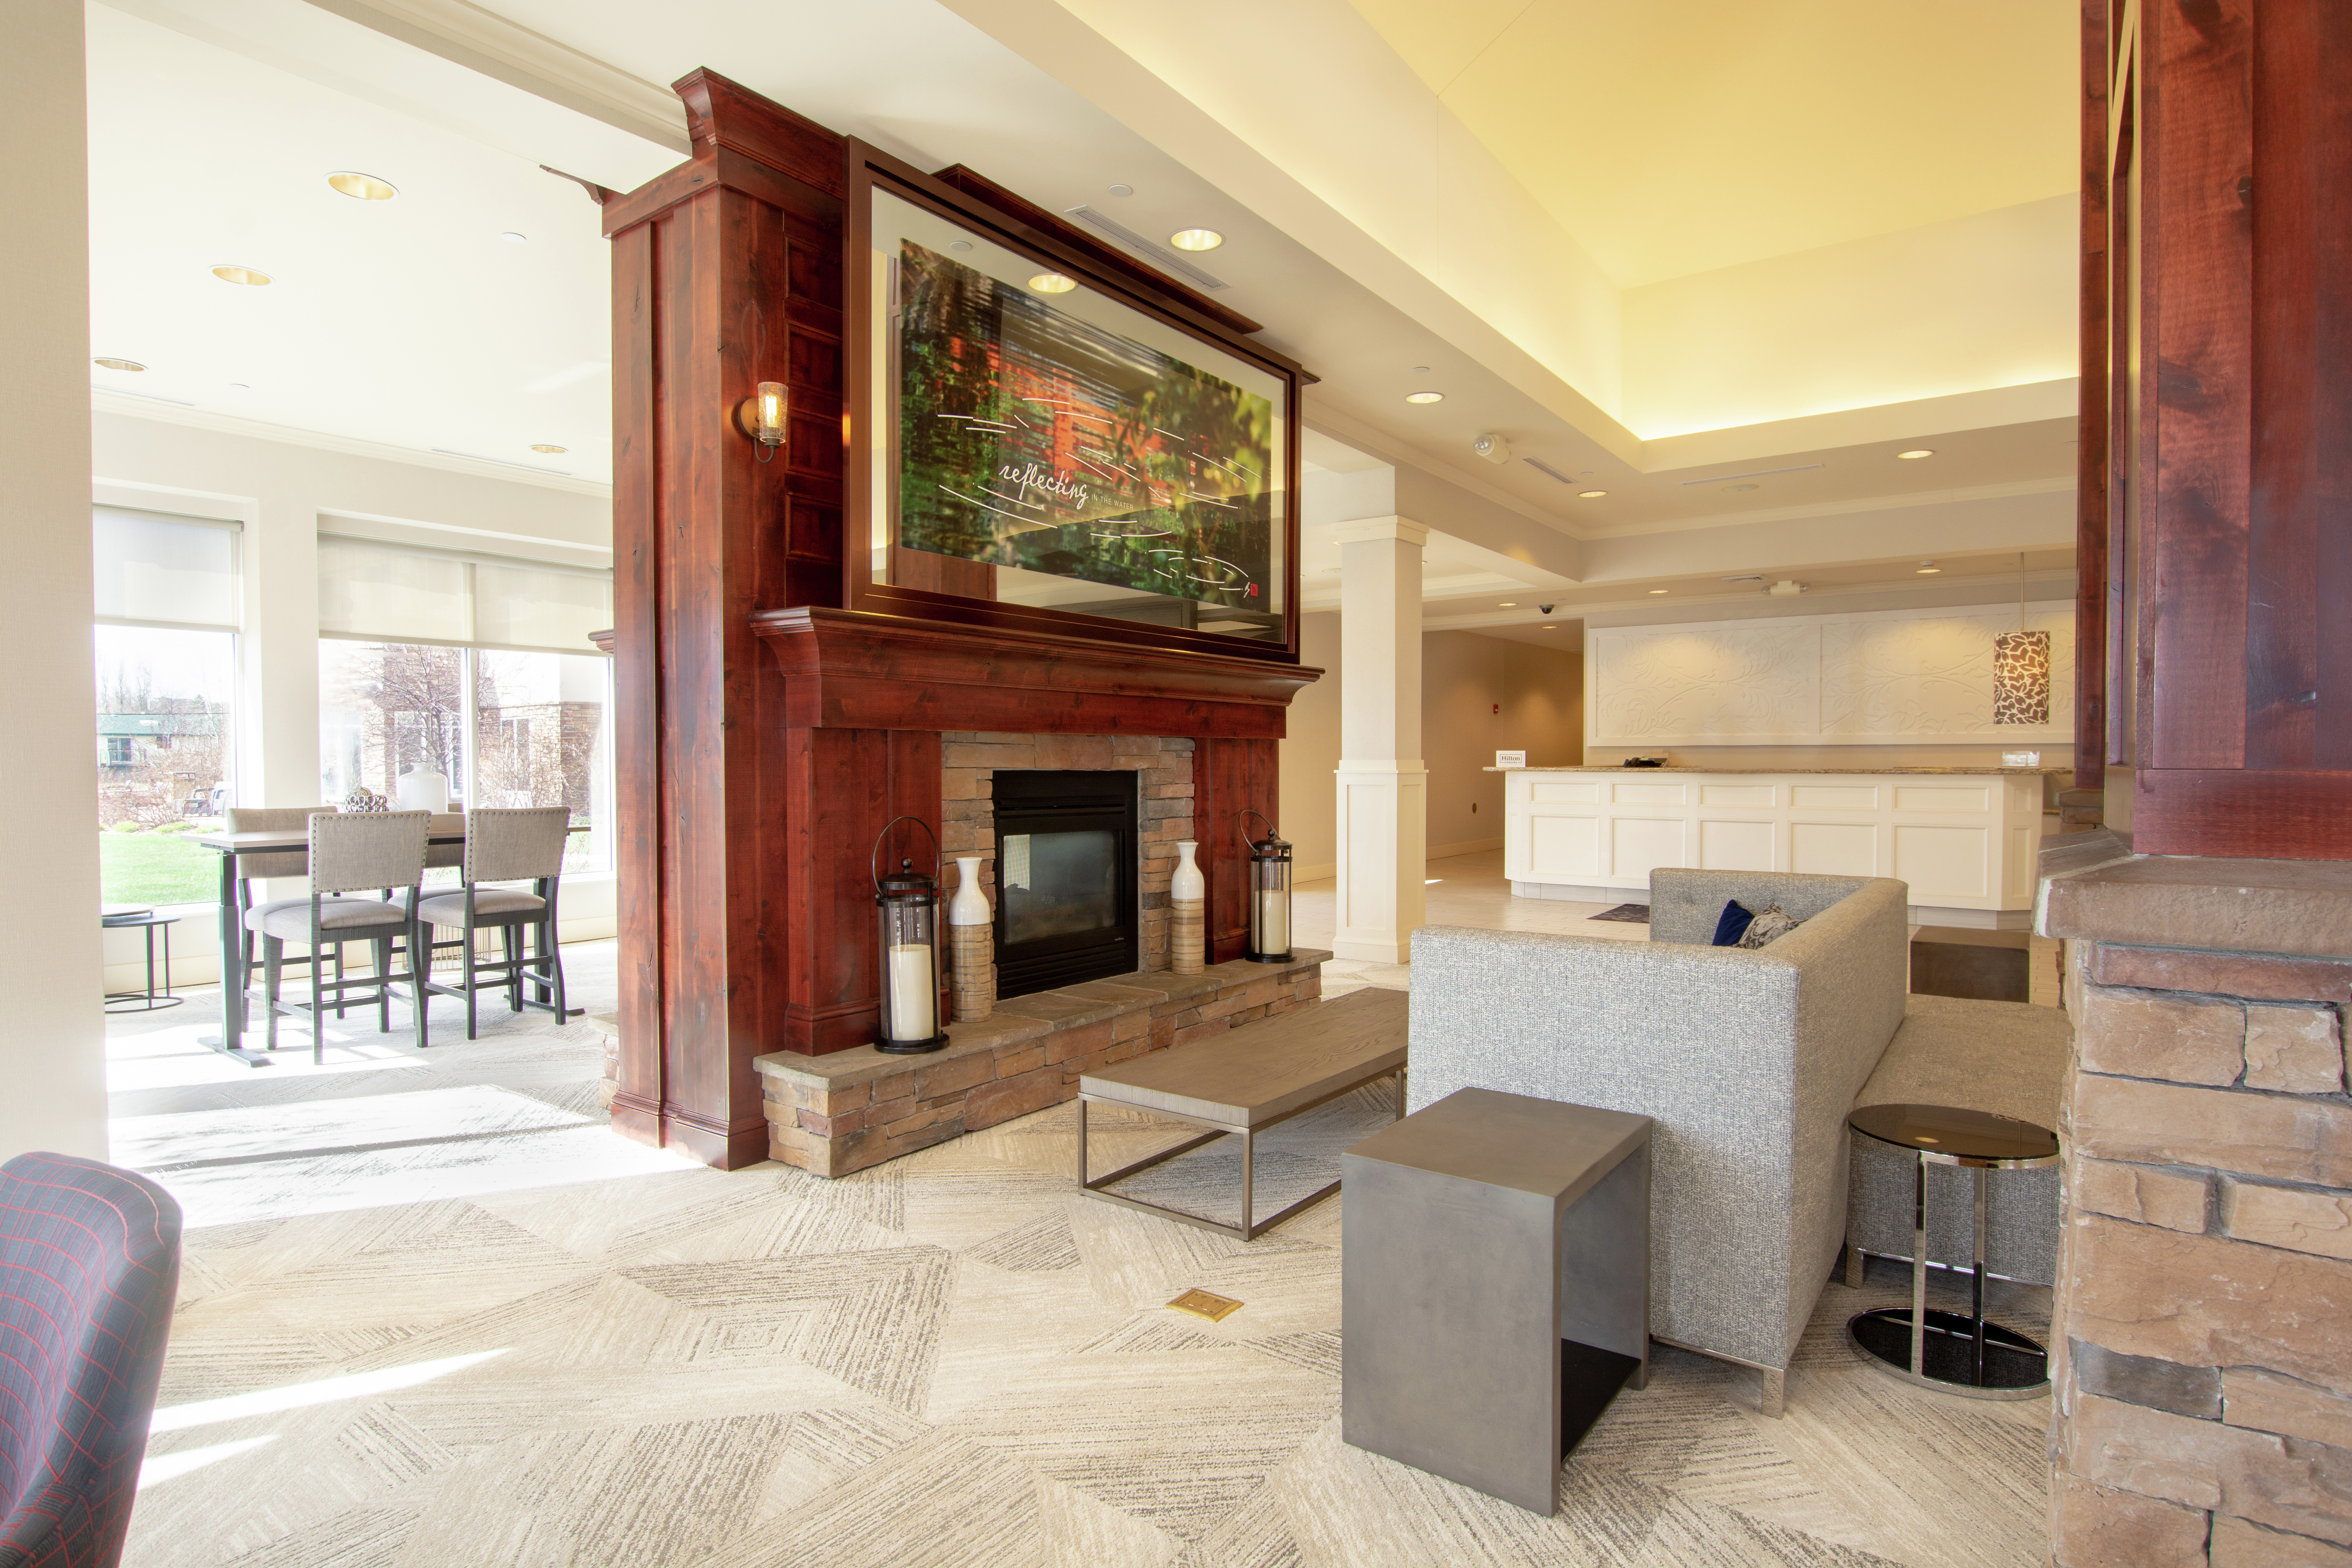 Lobby Seating And Fireplace